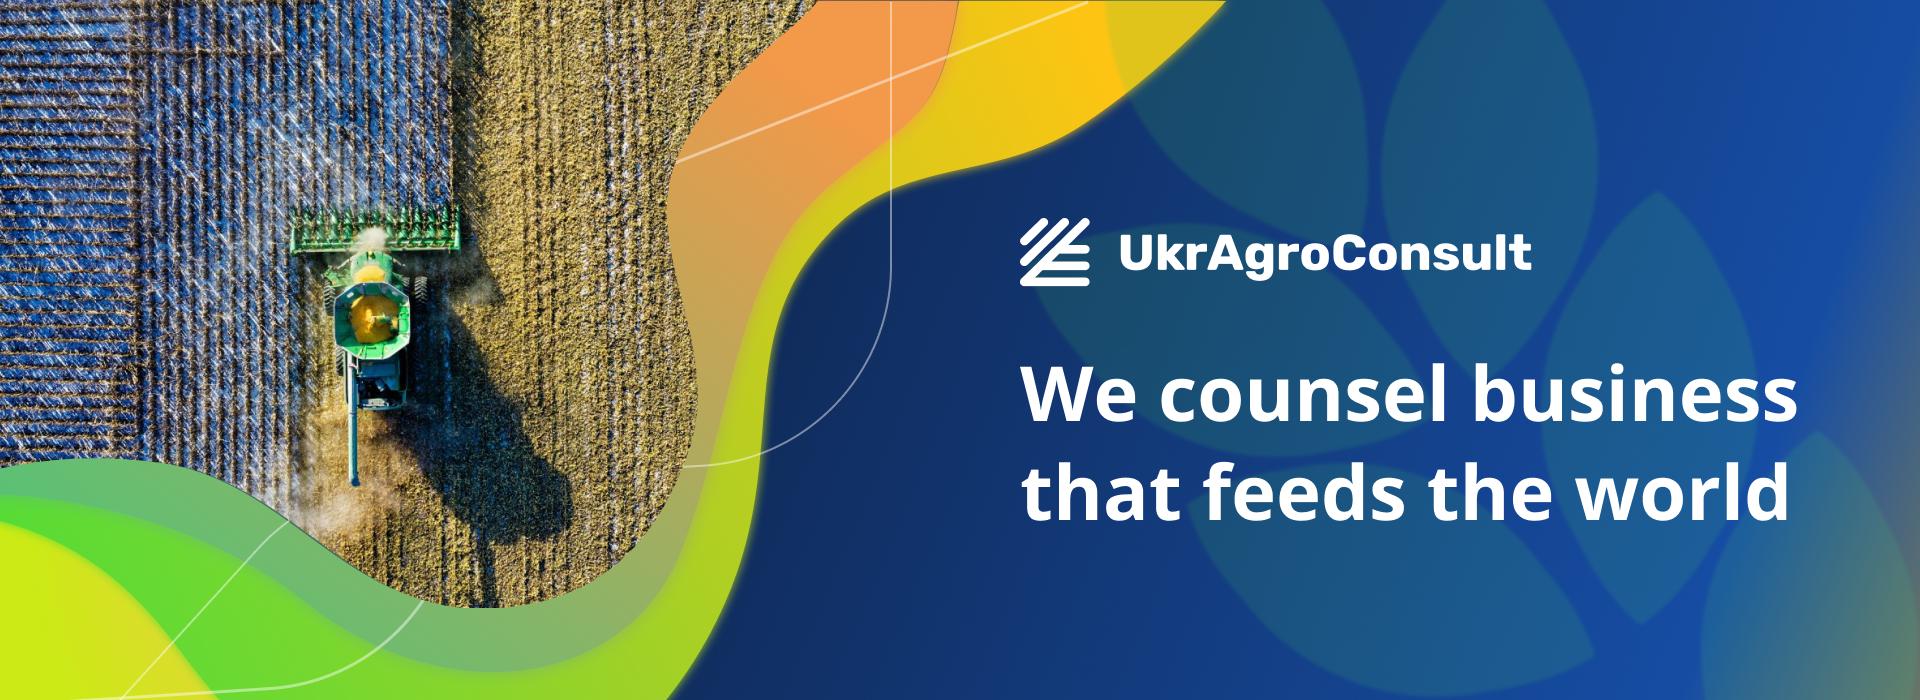 Customized Market Presentations for Agri Business – a New Service by UkrAgroConsult